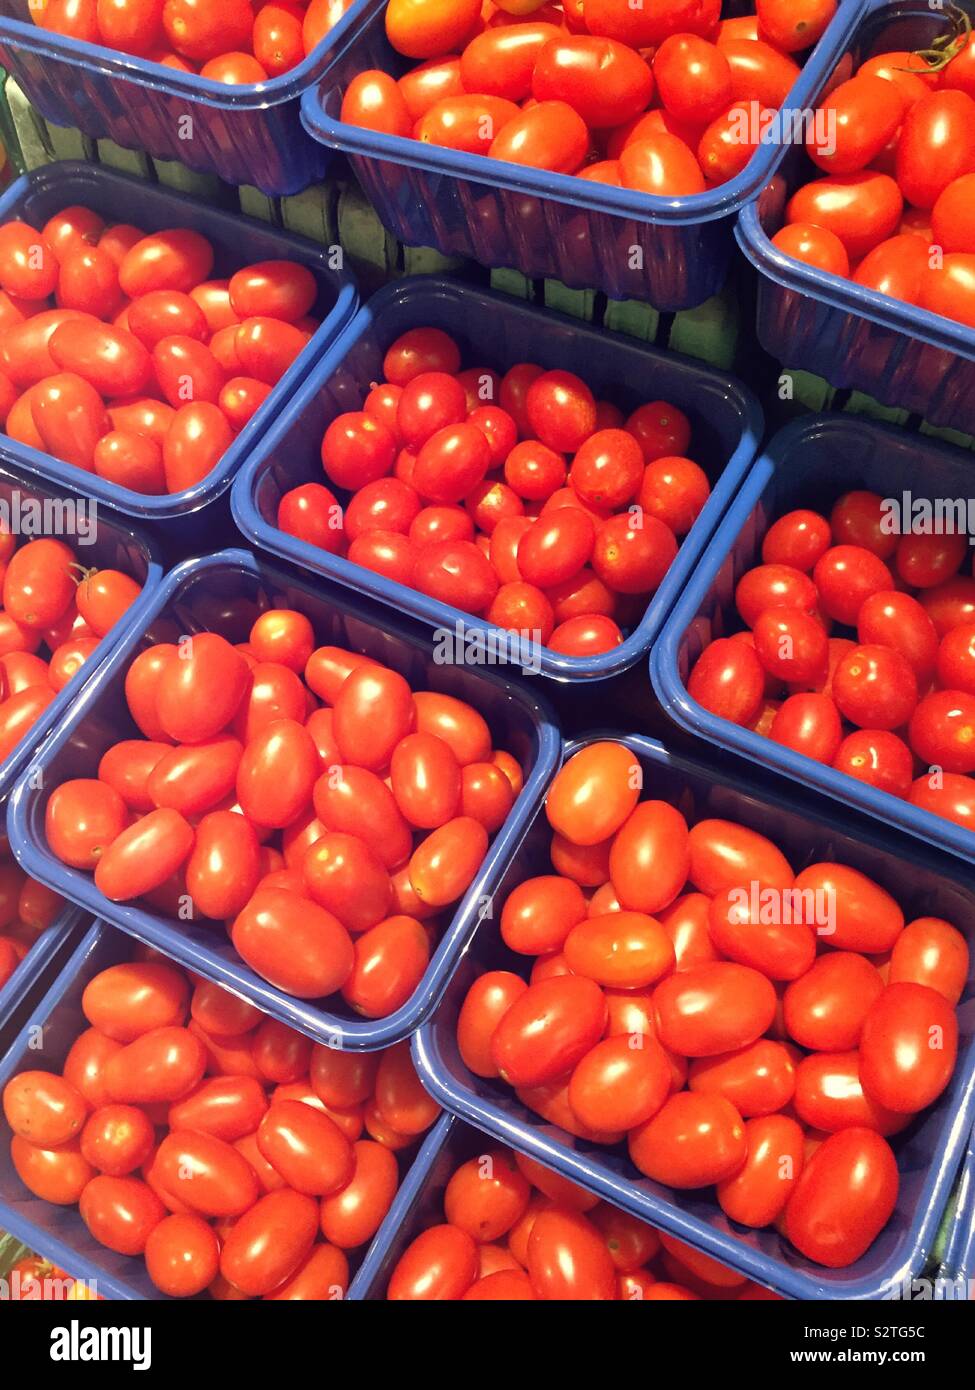 Red grape tomatoes bins for sale in a grocery store produce aisle USA Stock Photo